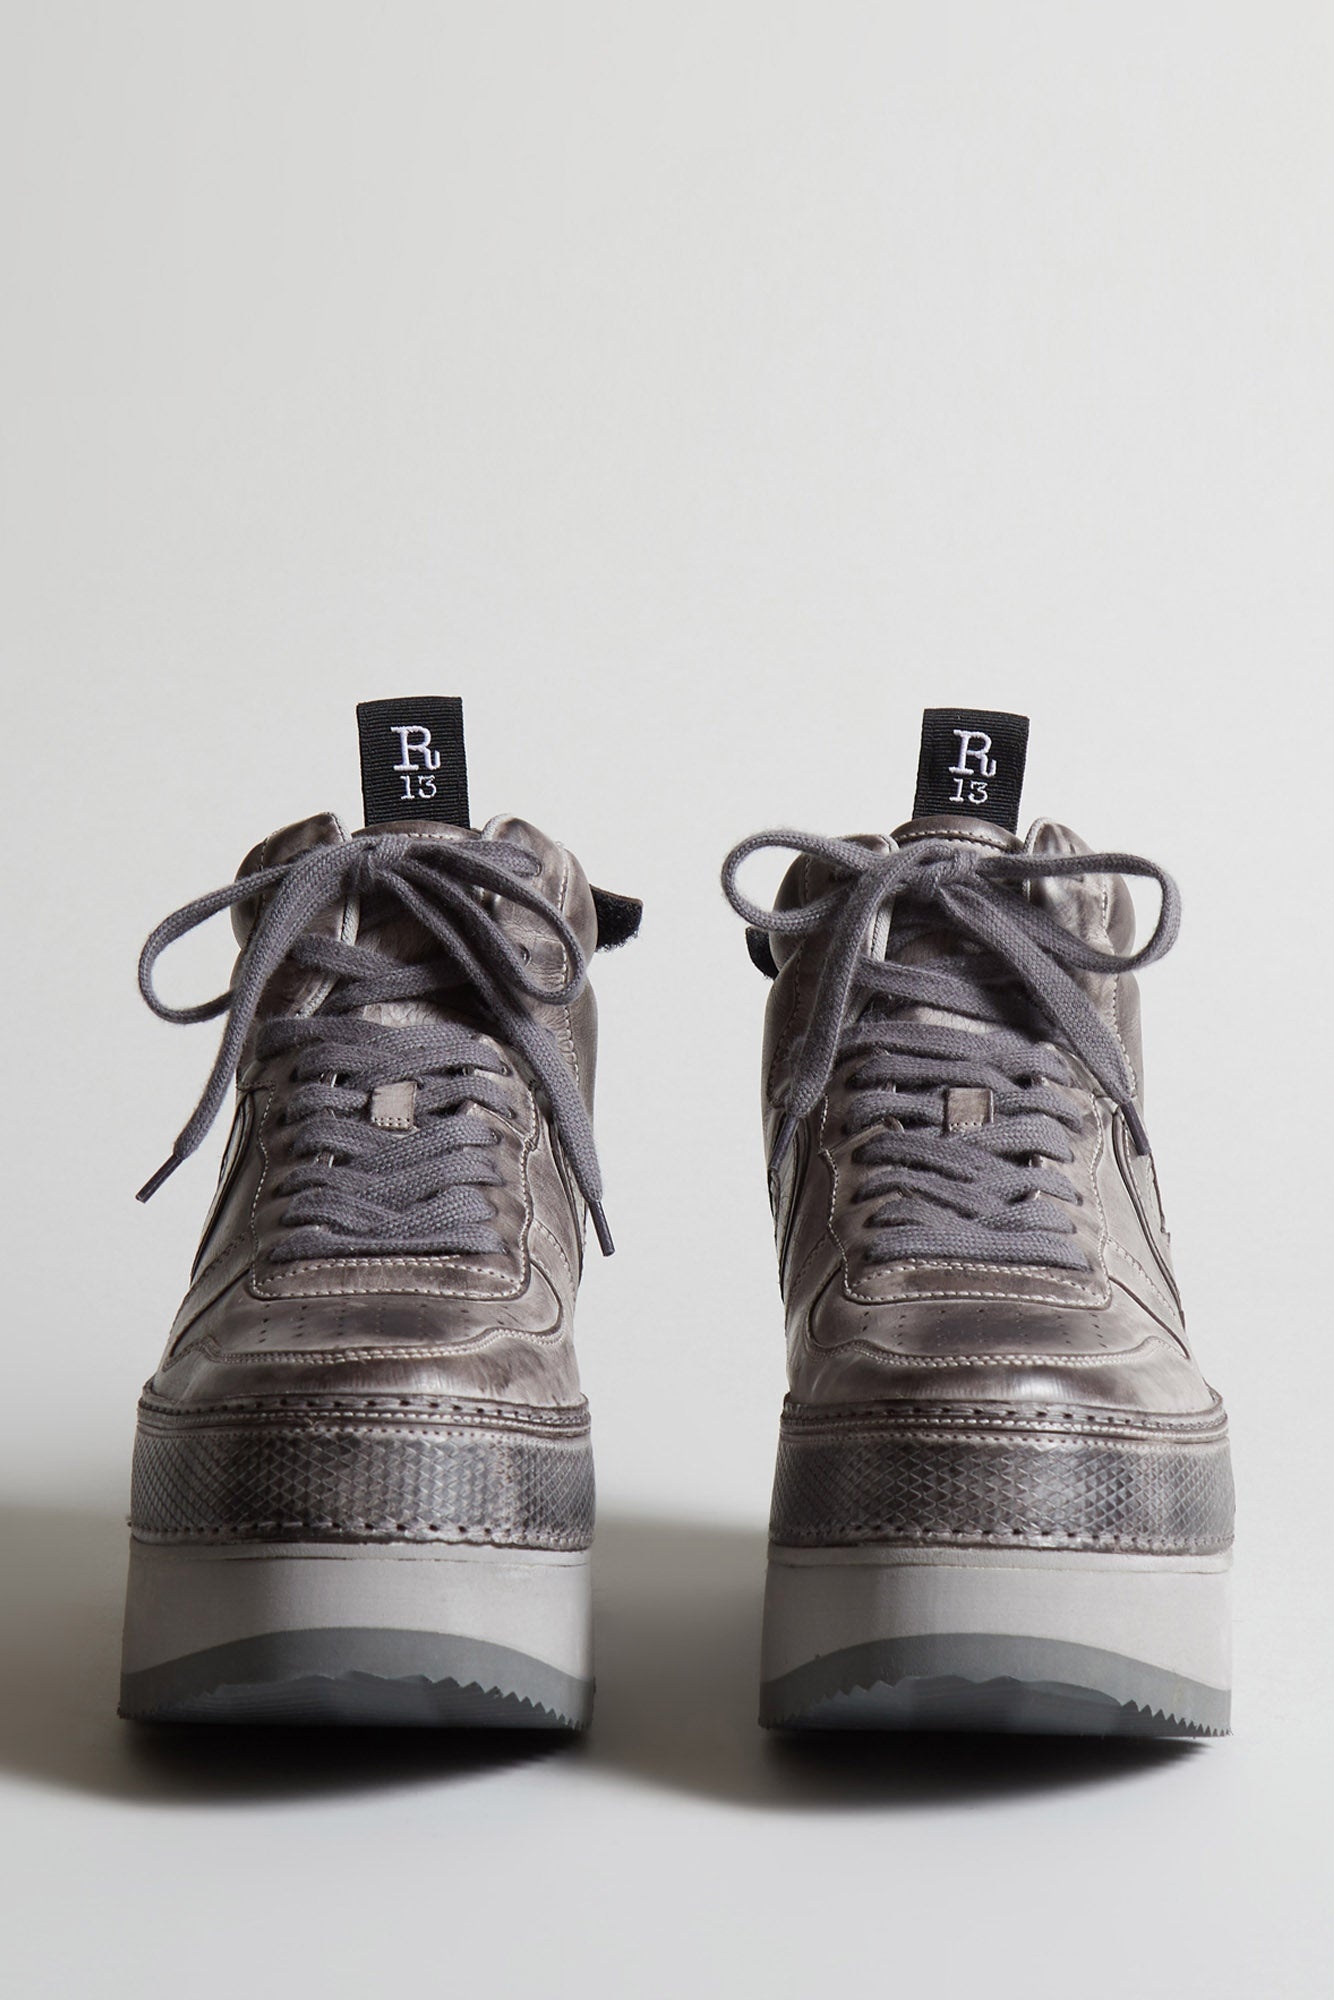 THE RIOT SNEAKER - DISTRESSED GREY LEATHER - 2